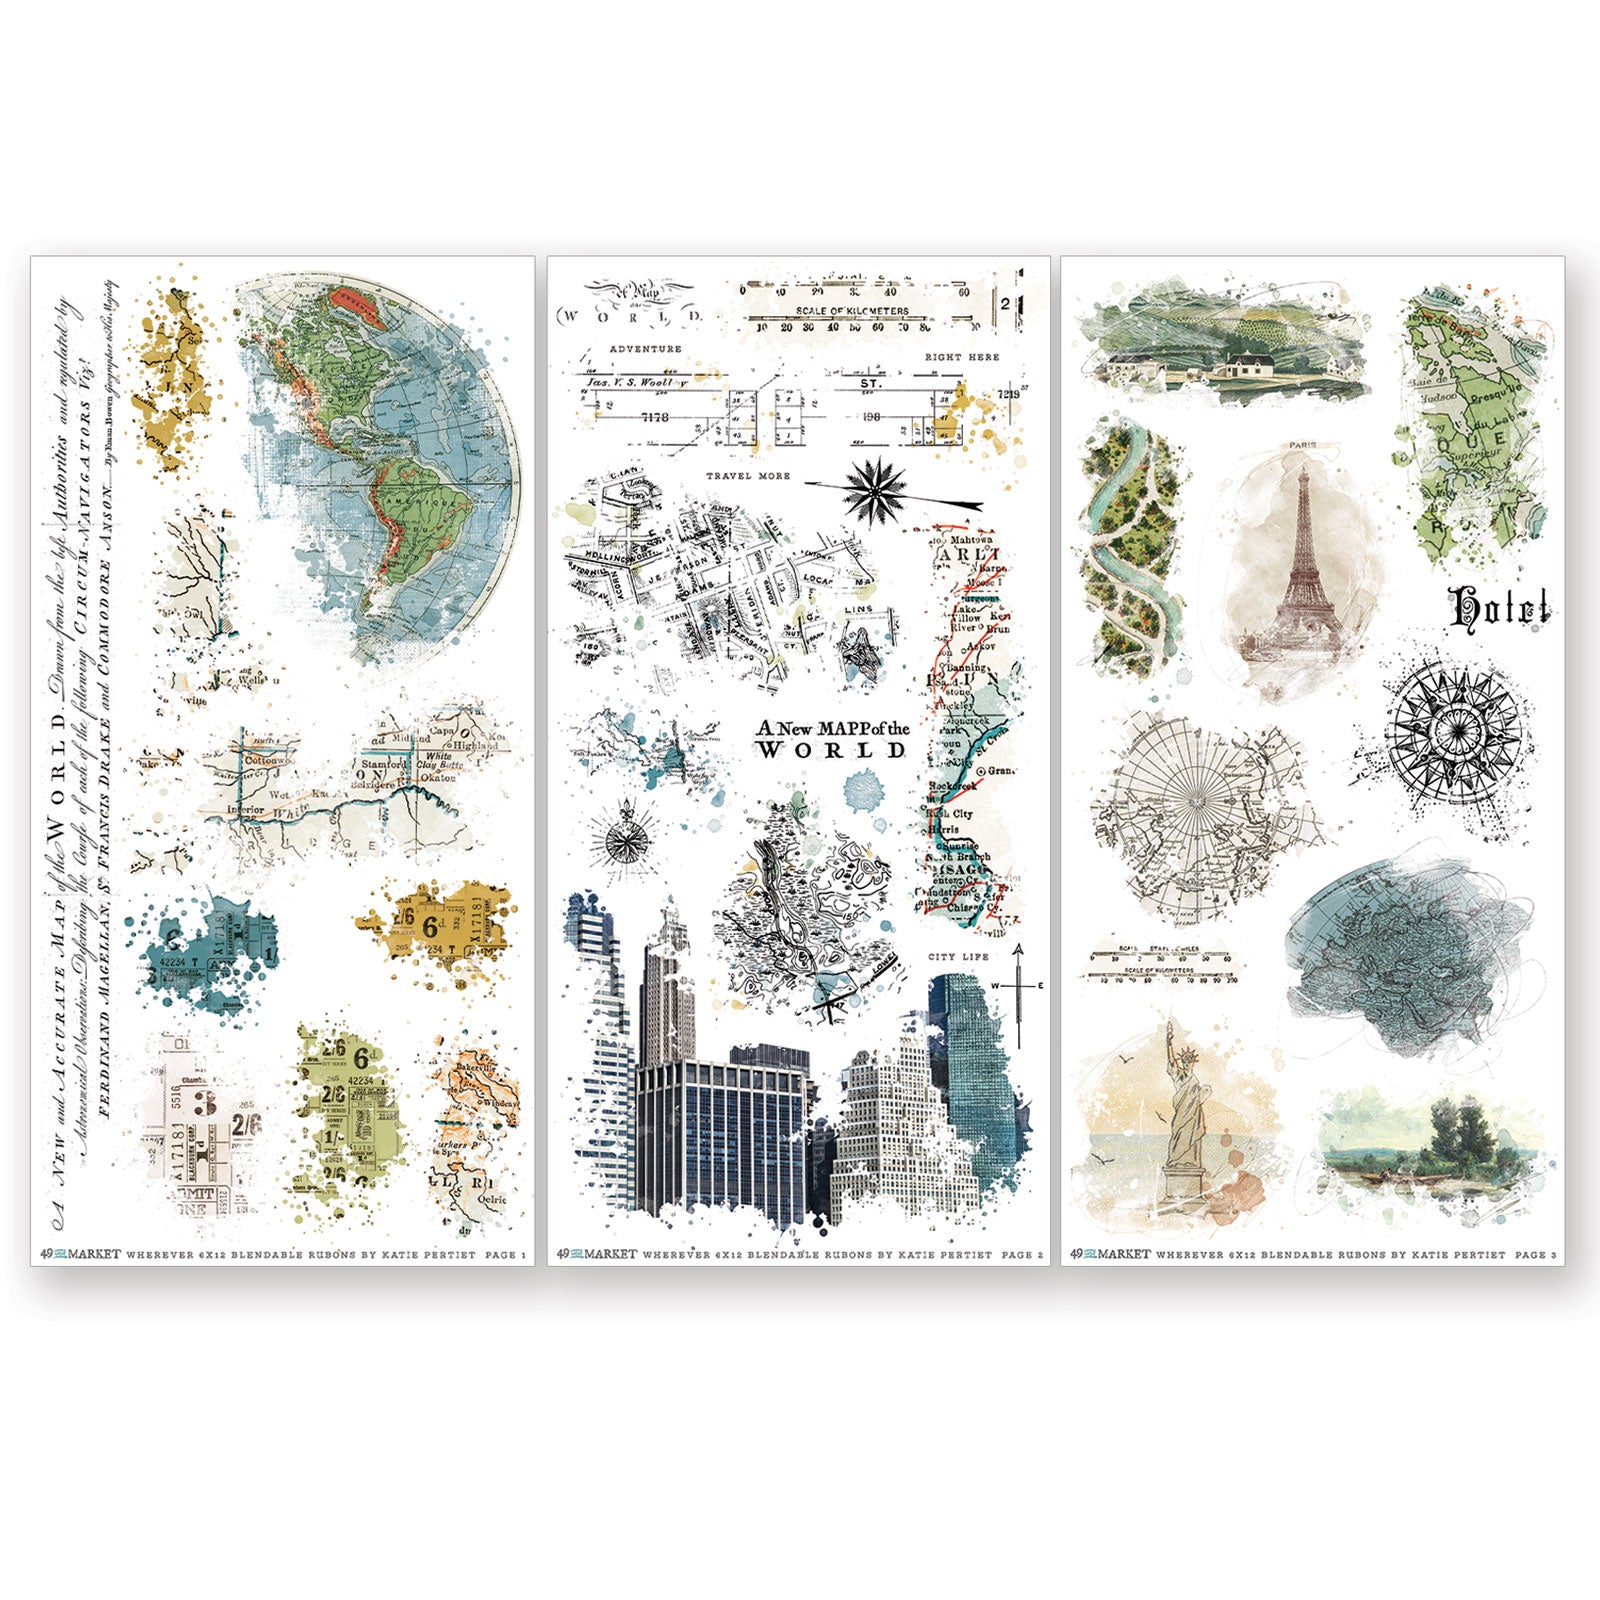 49 & Market Wherever Collection Bundle with Chipboard – Kreative